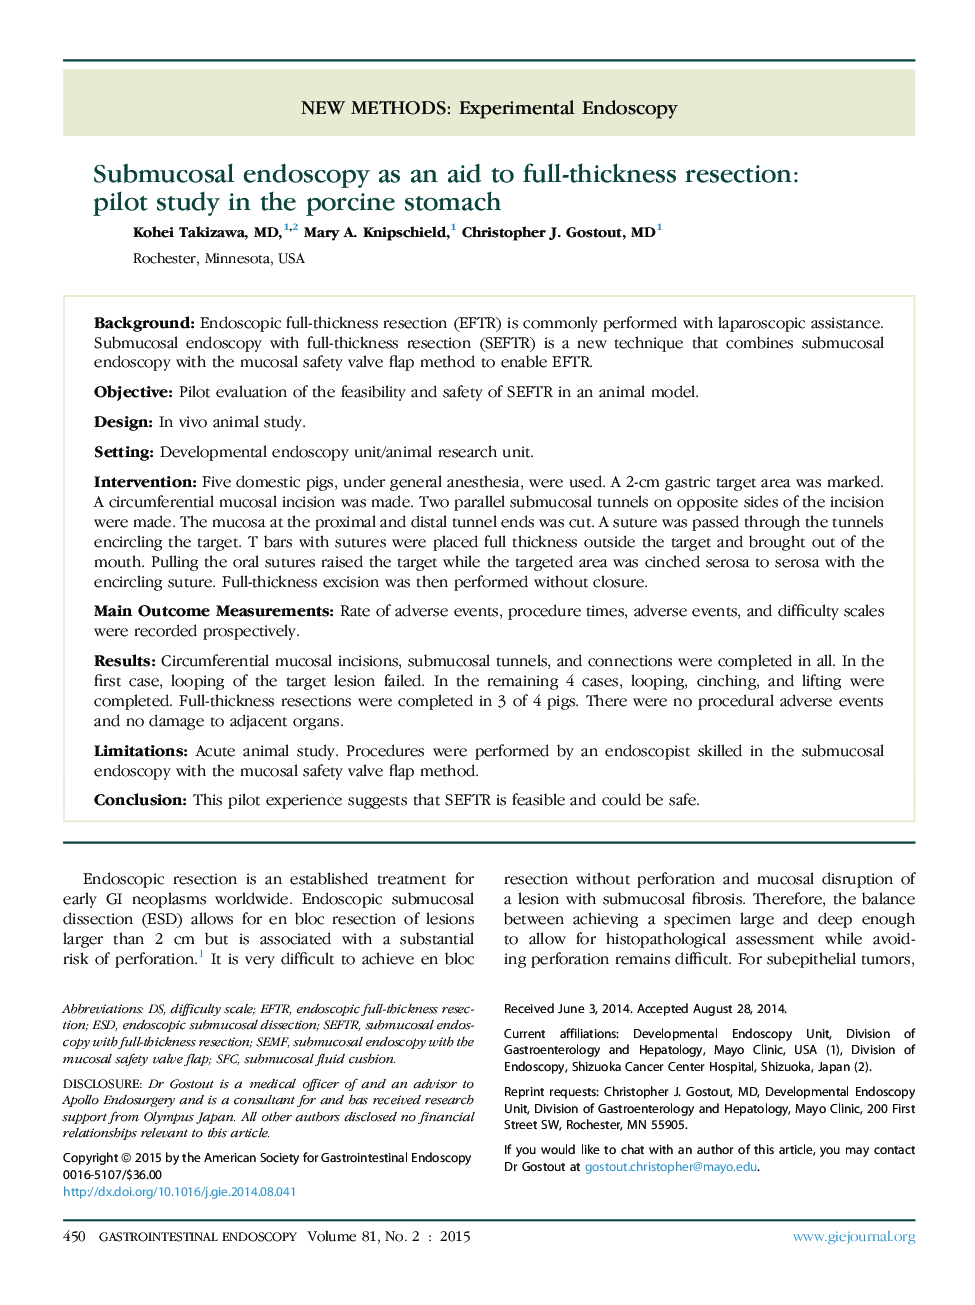 Submucosal endoscopy as an aid to full-thickness resection: pilot study in the porcine stomach 